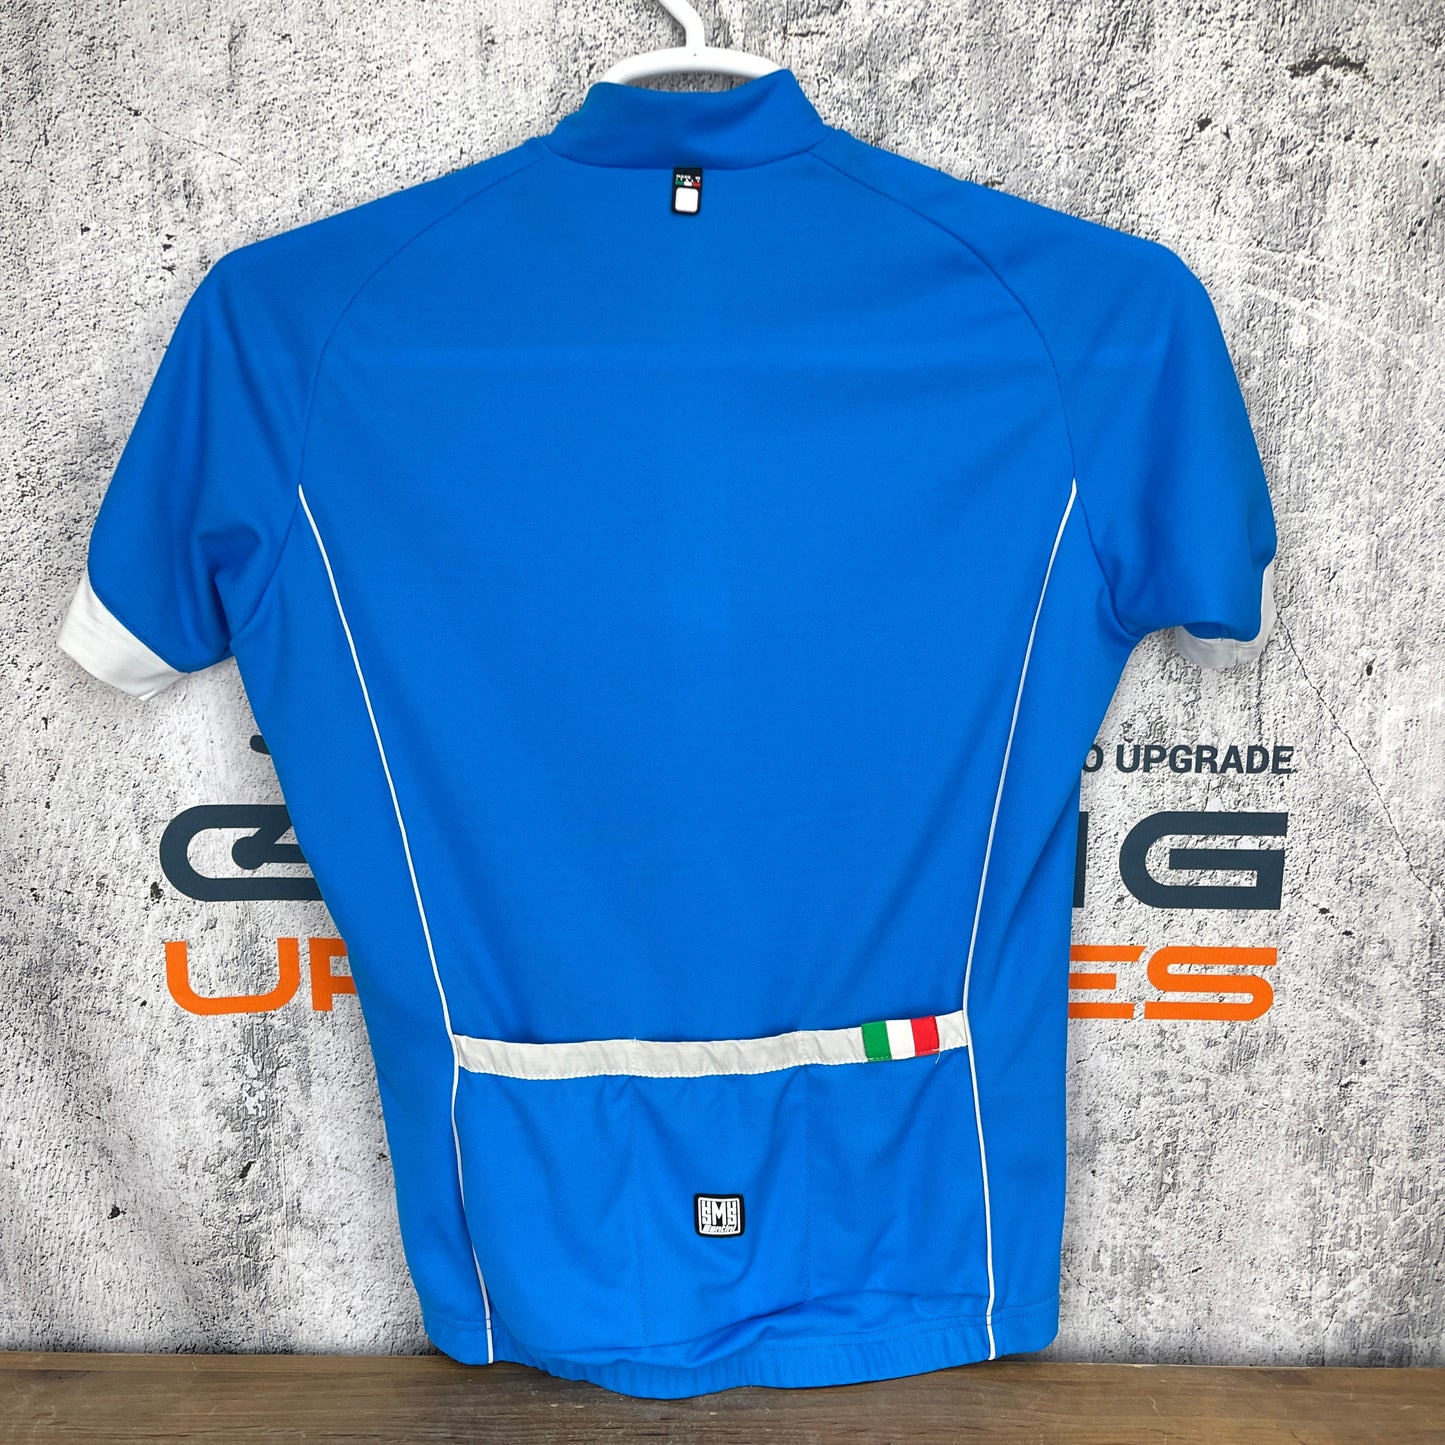 Worn Once! SMS Santini Short Sleeve Men's Large Cycling Jersey